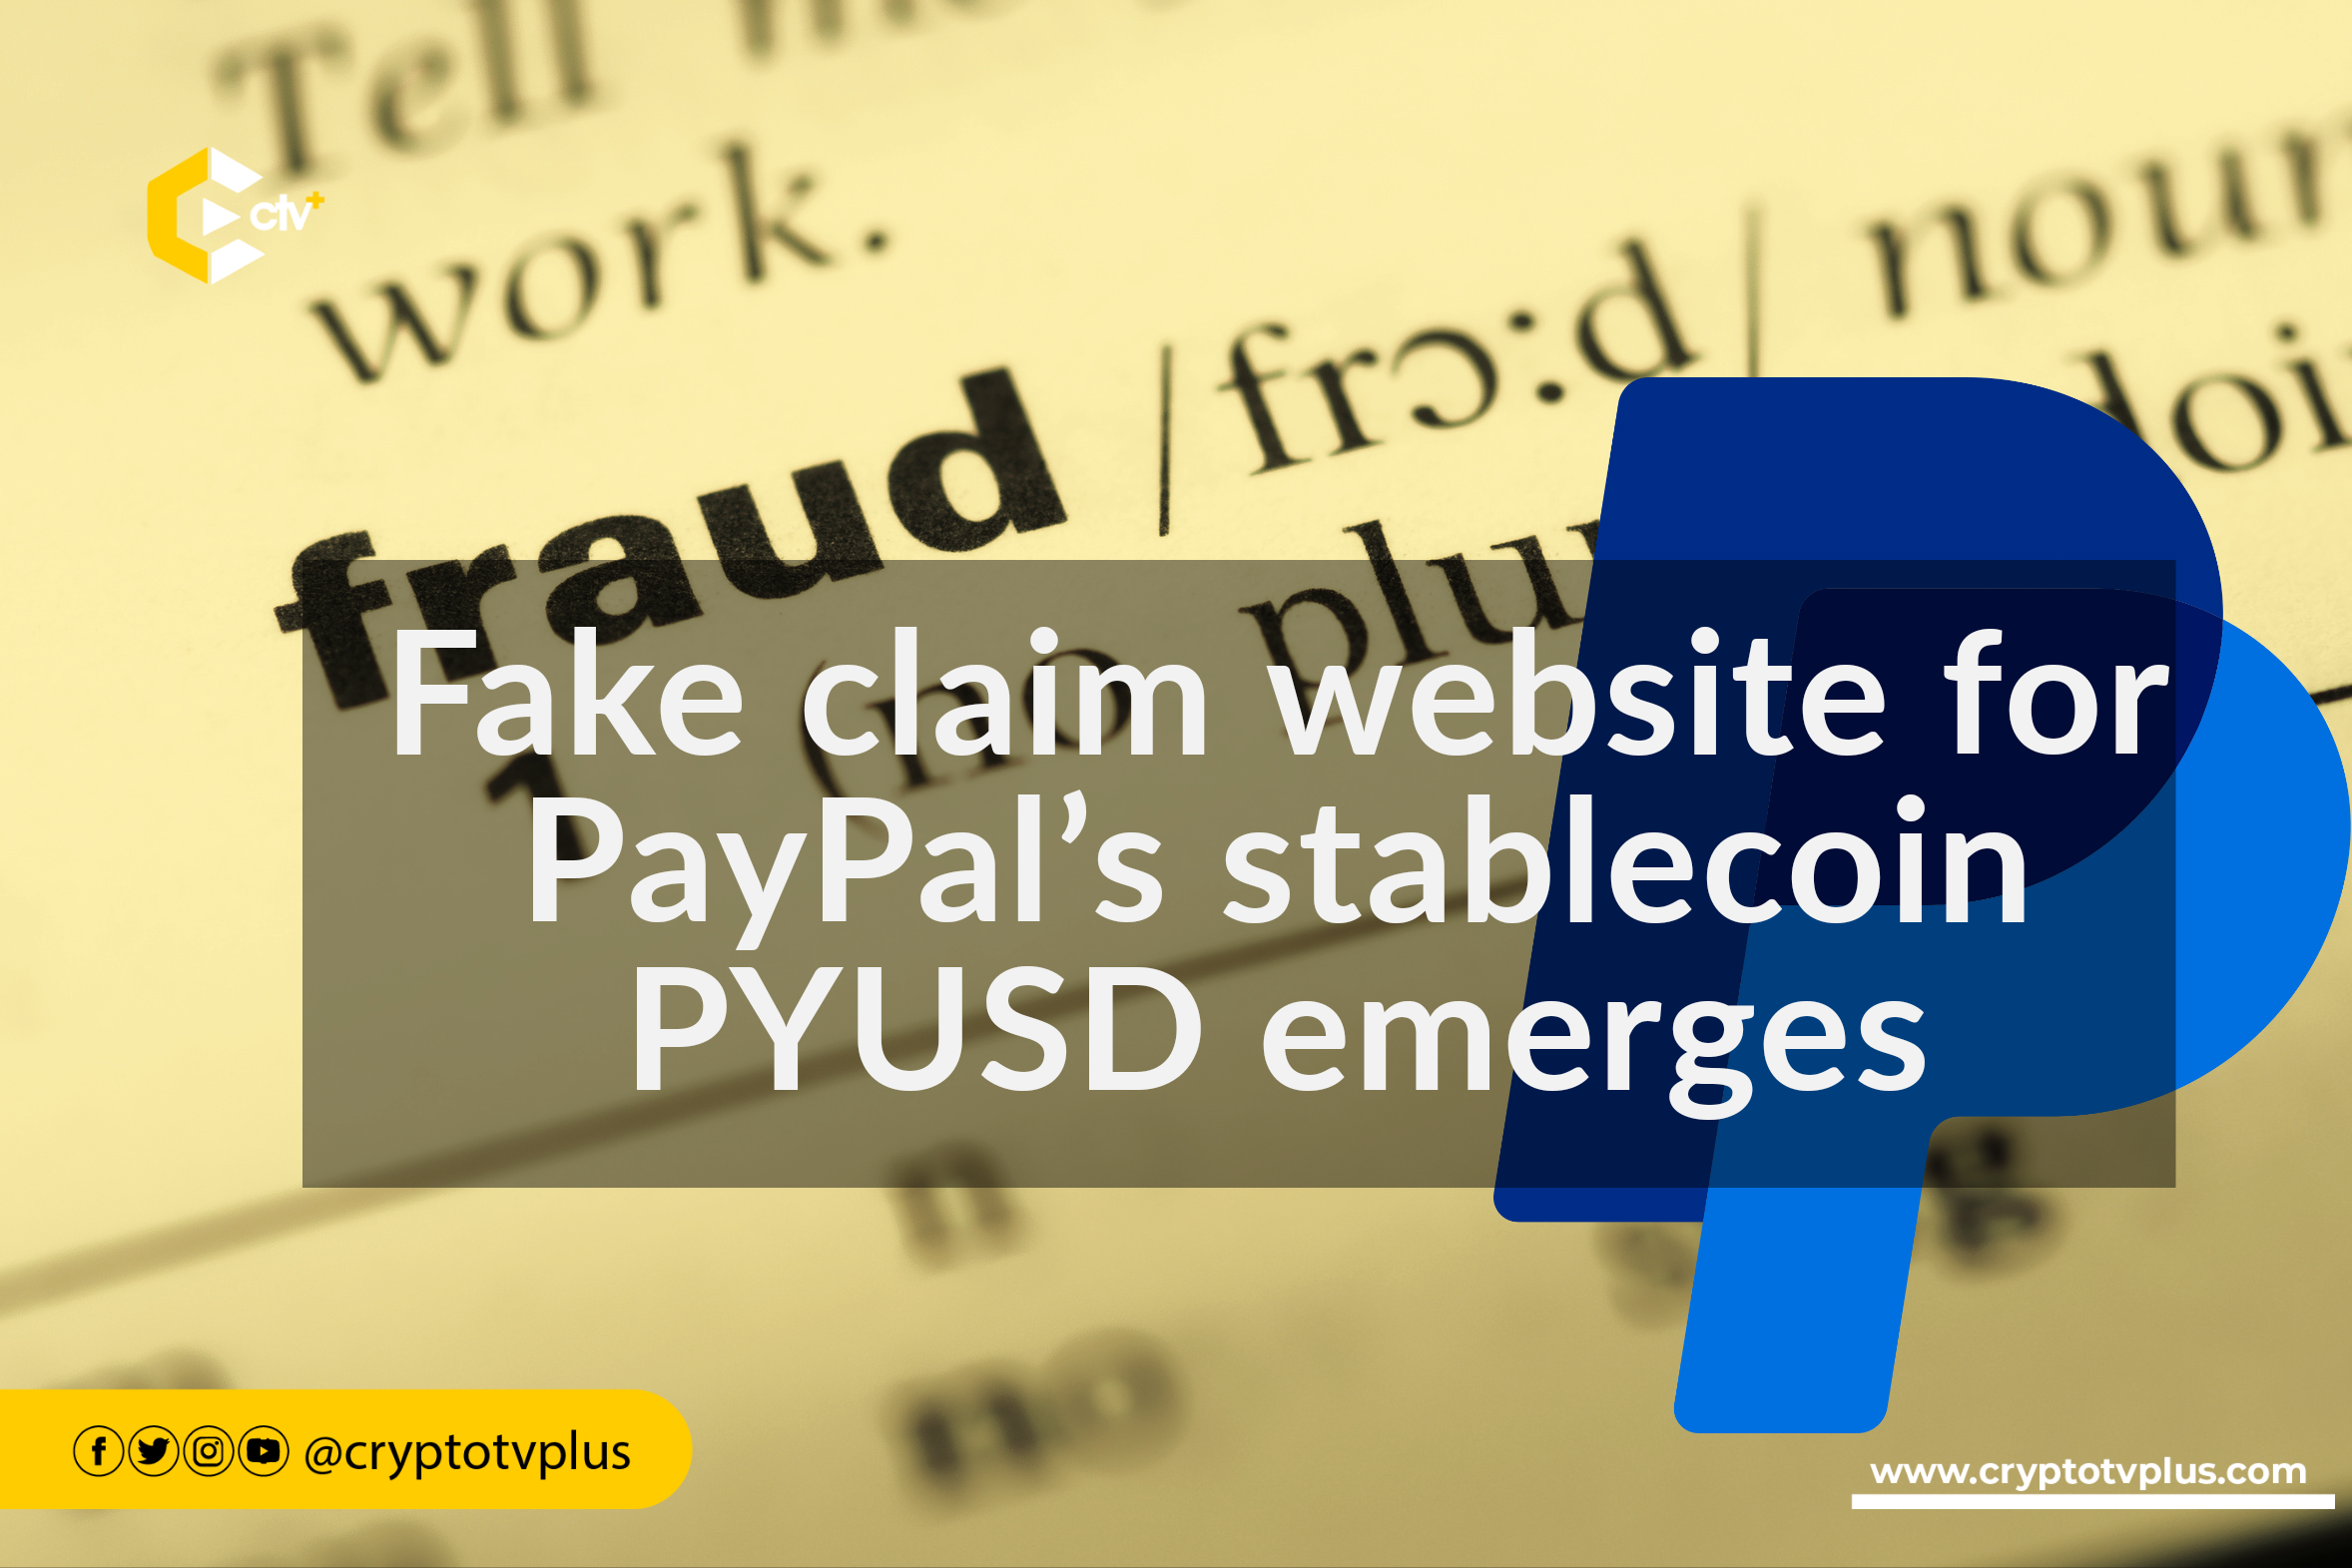 A fraudulent website has emerged, falsely claiming to be associated with PayPal's stablecoin, PYUSD, misleading users with deceptive information.